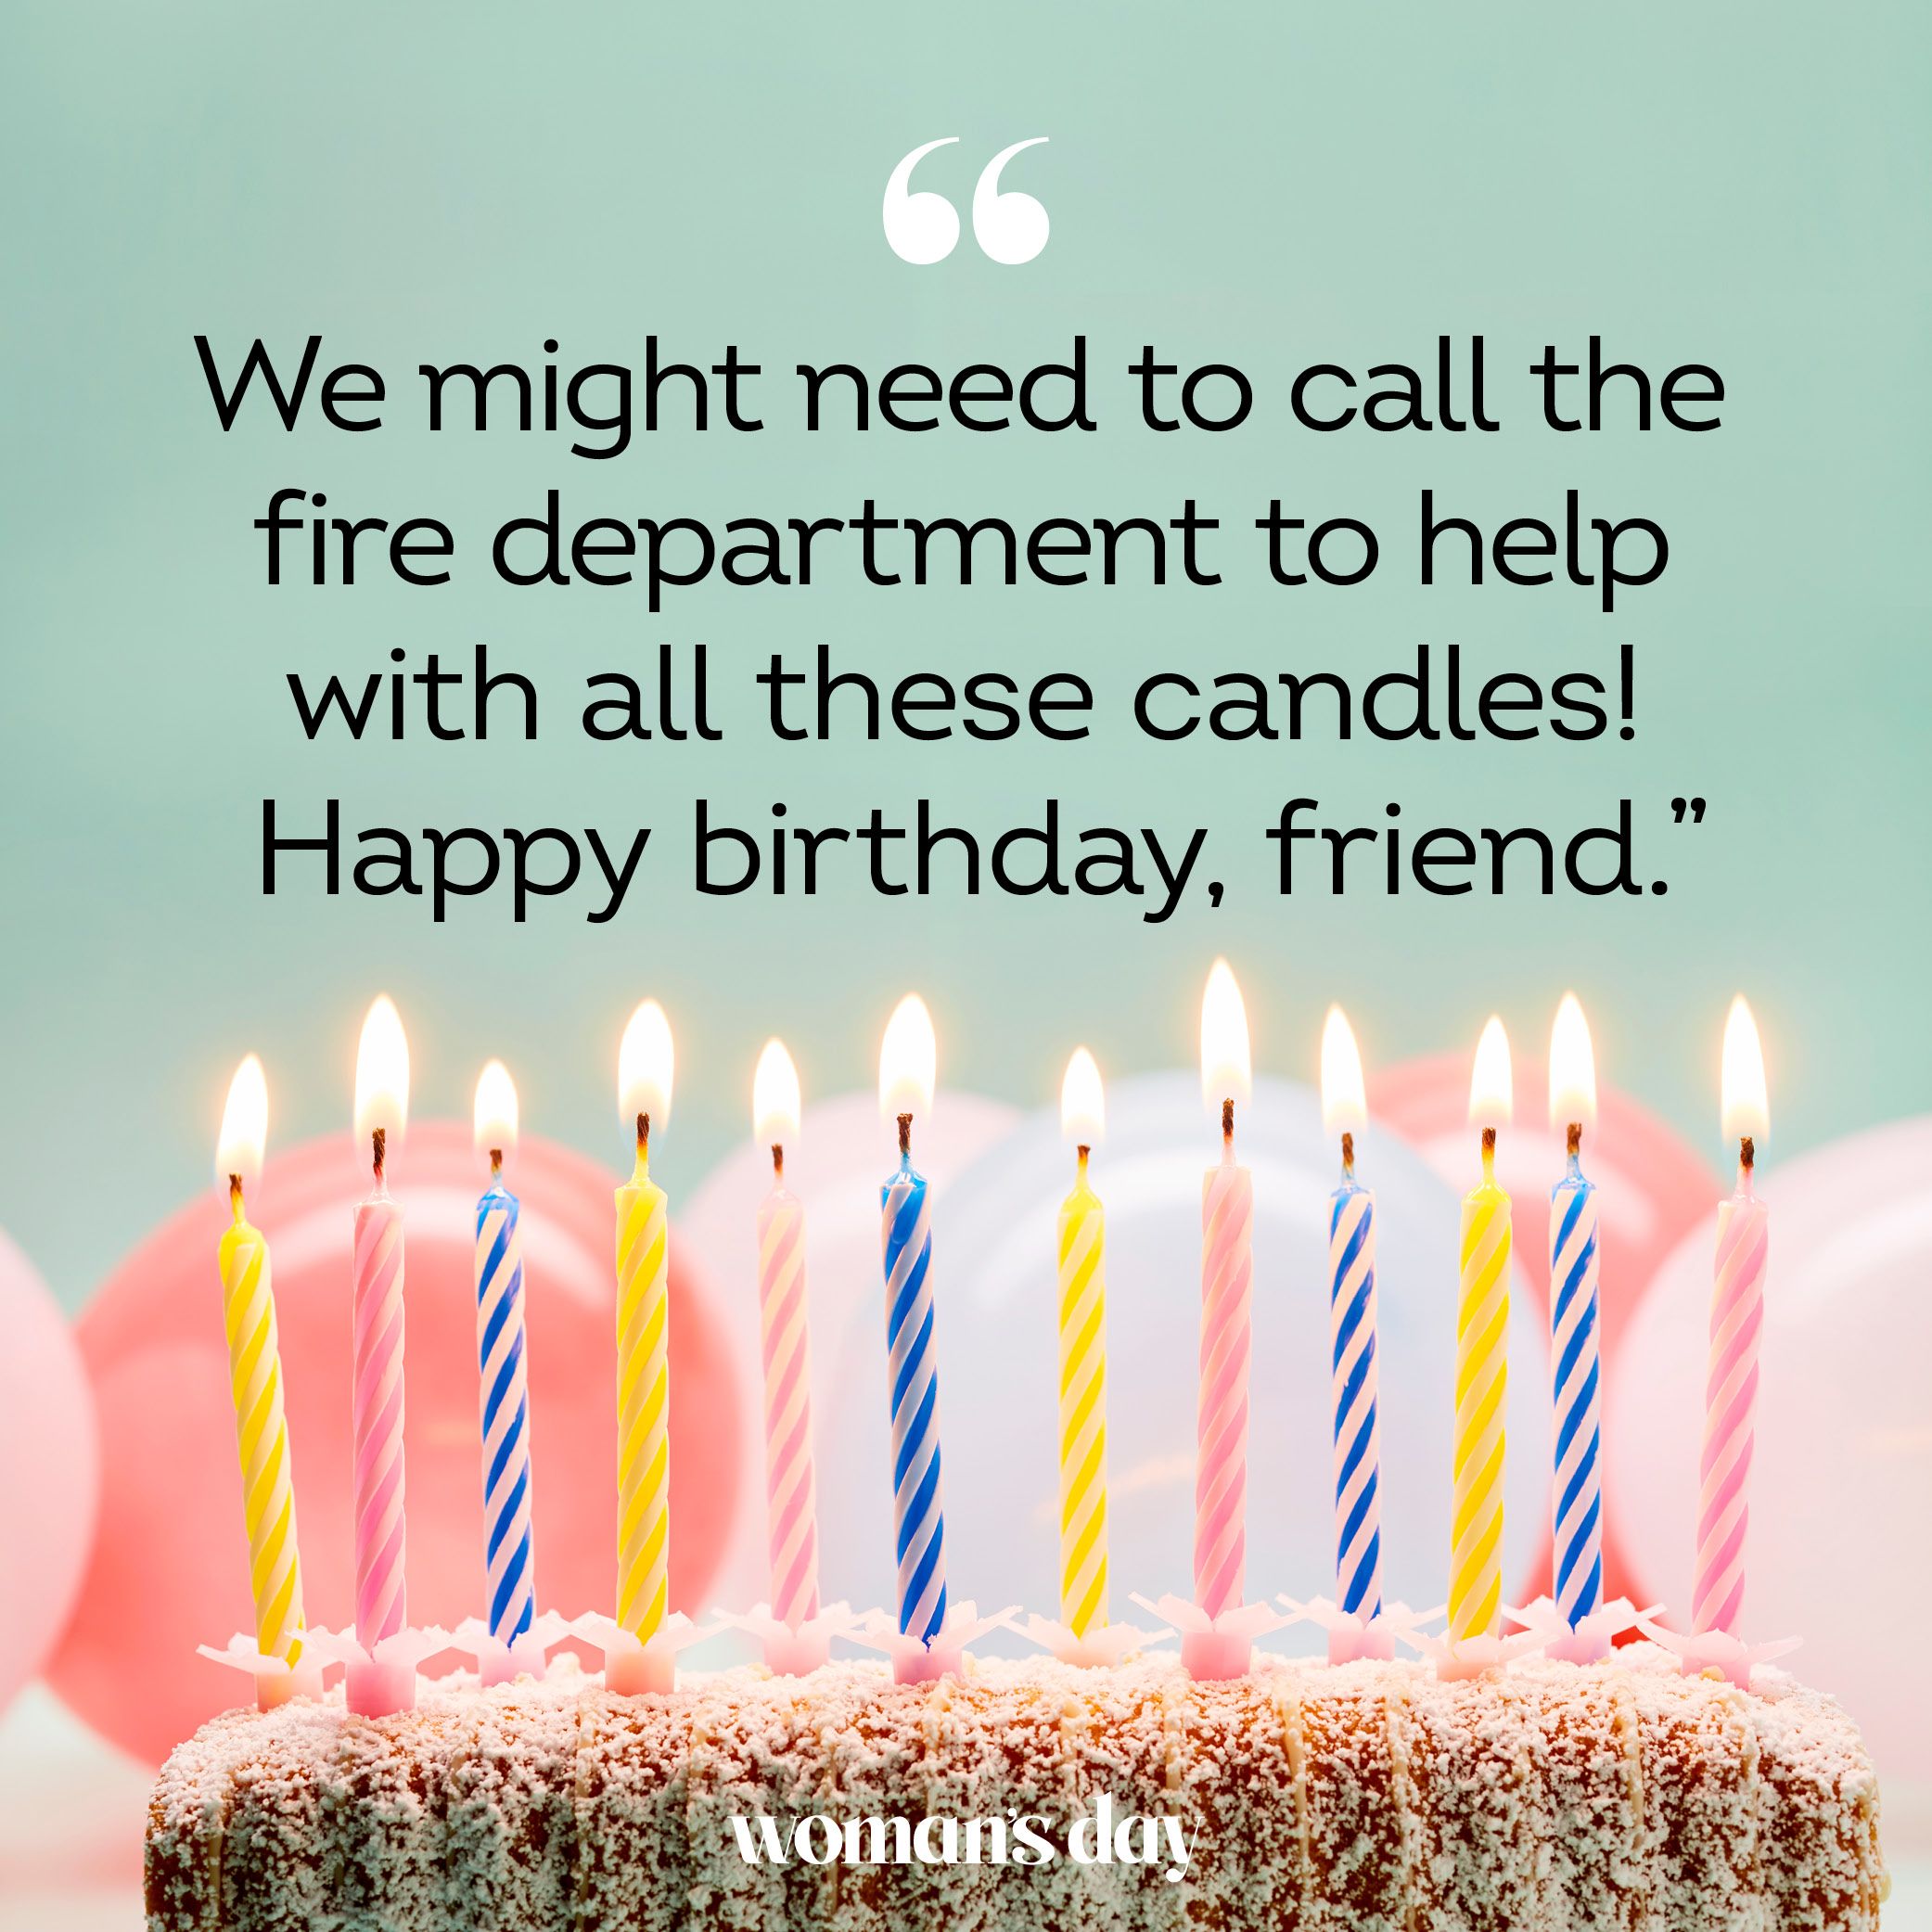 80 Best Friend Happy Birthday Wishes - B-Day Messages for Friend